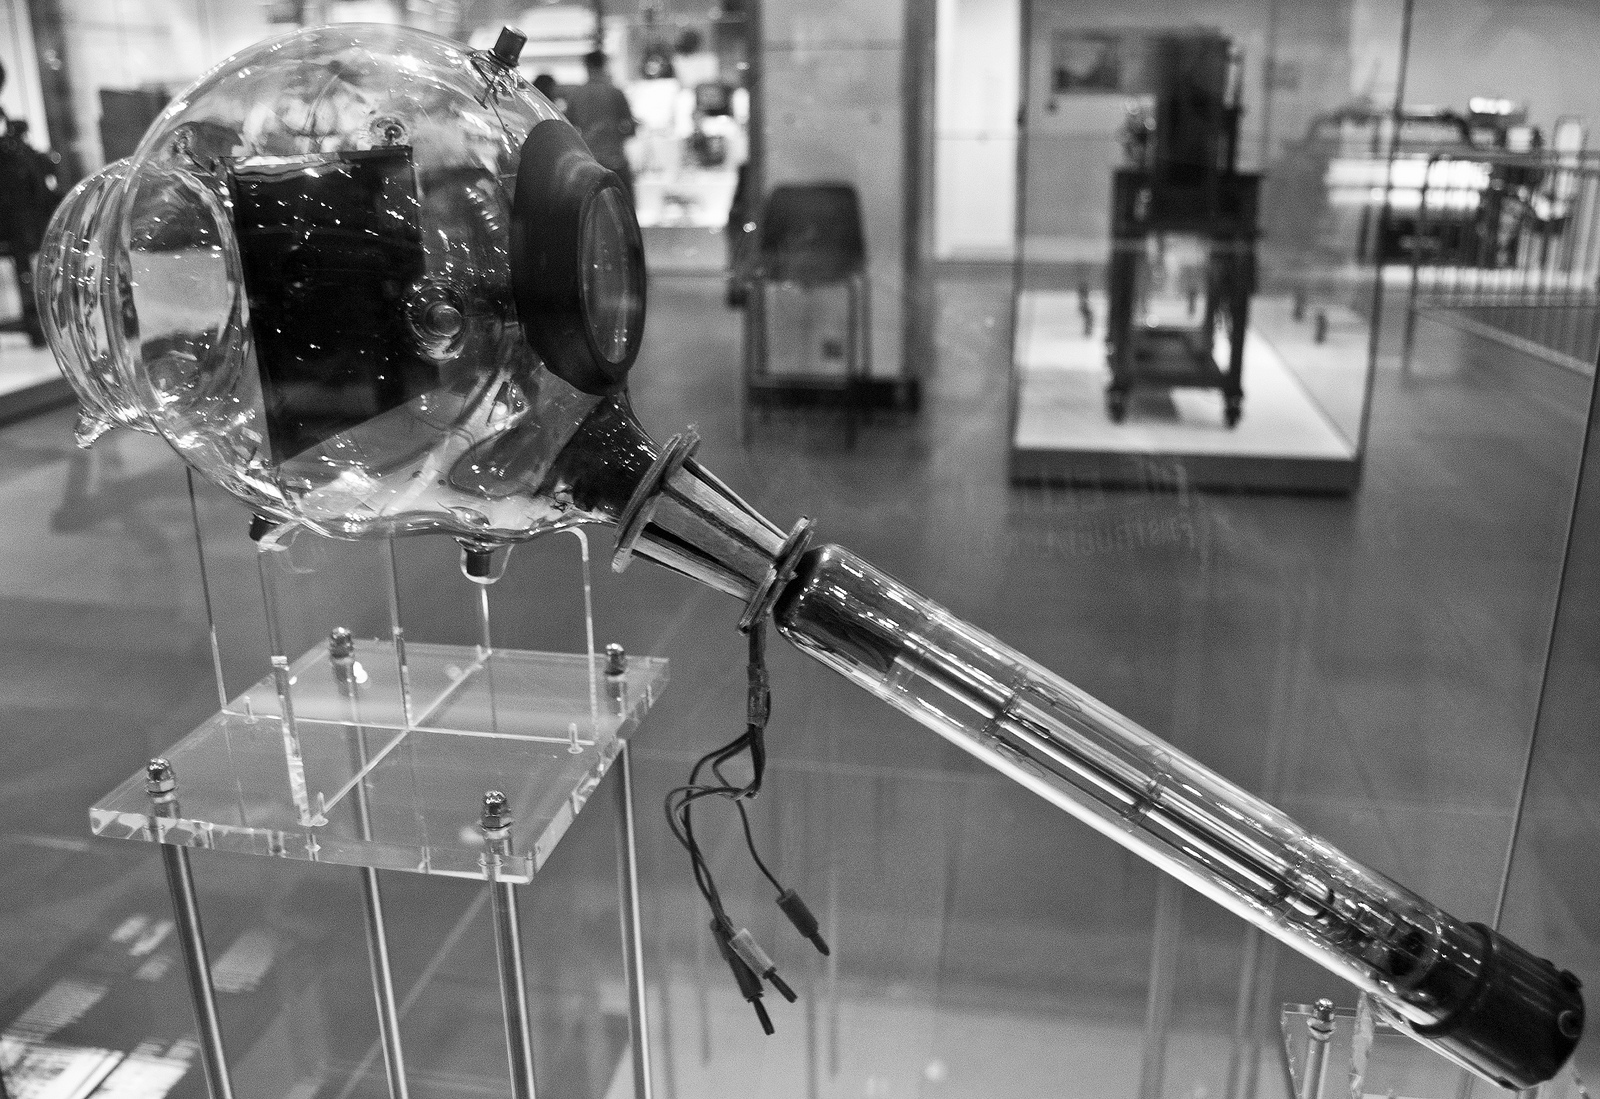 Iconoscope. first practical television camera from 1933 designed by Vladimir Zworykin taken in the science museum